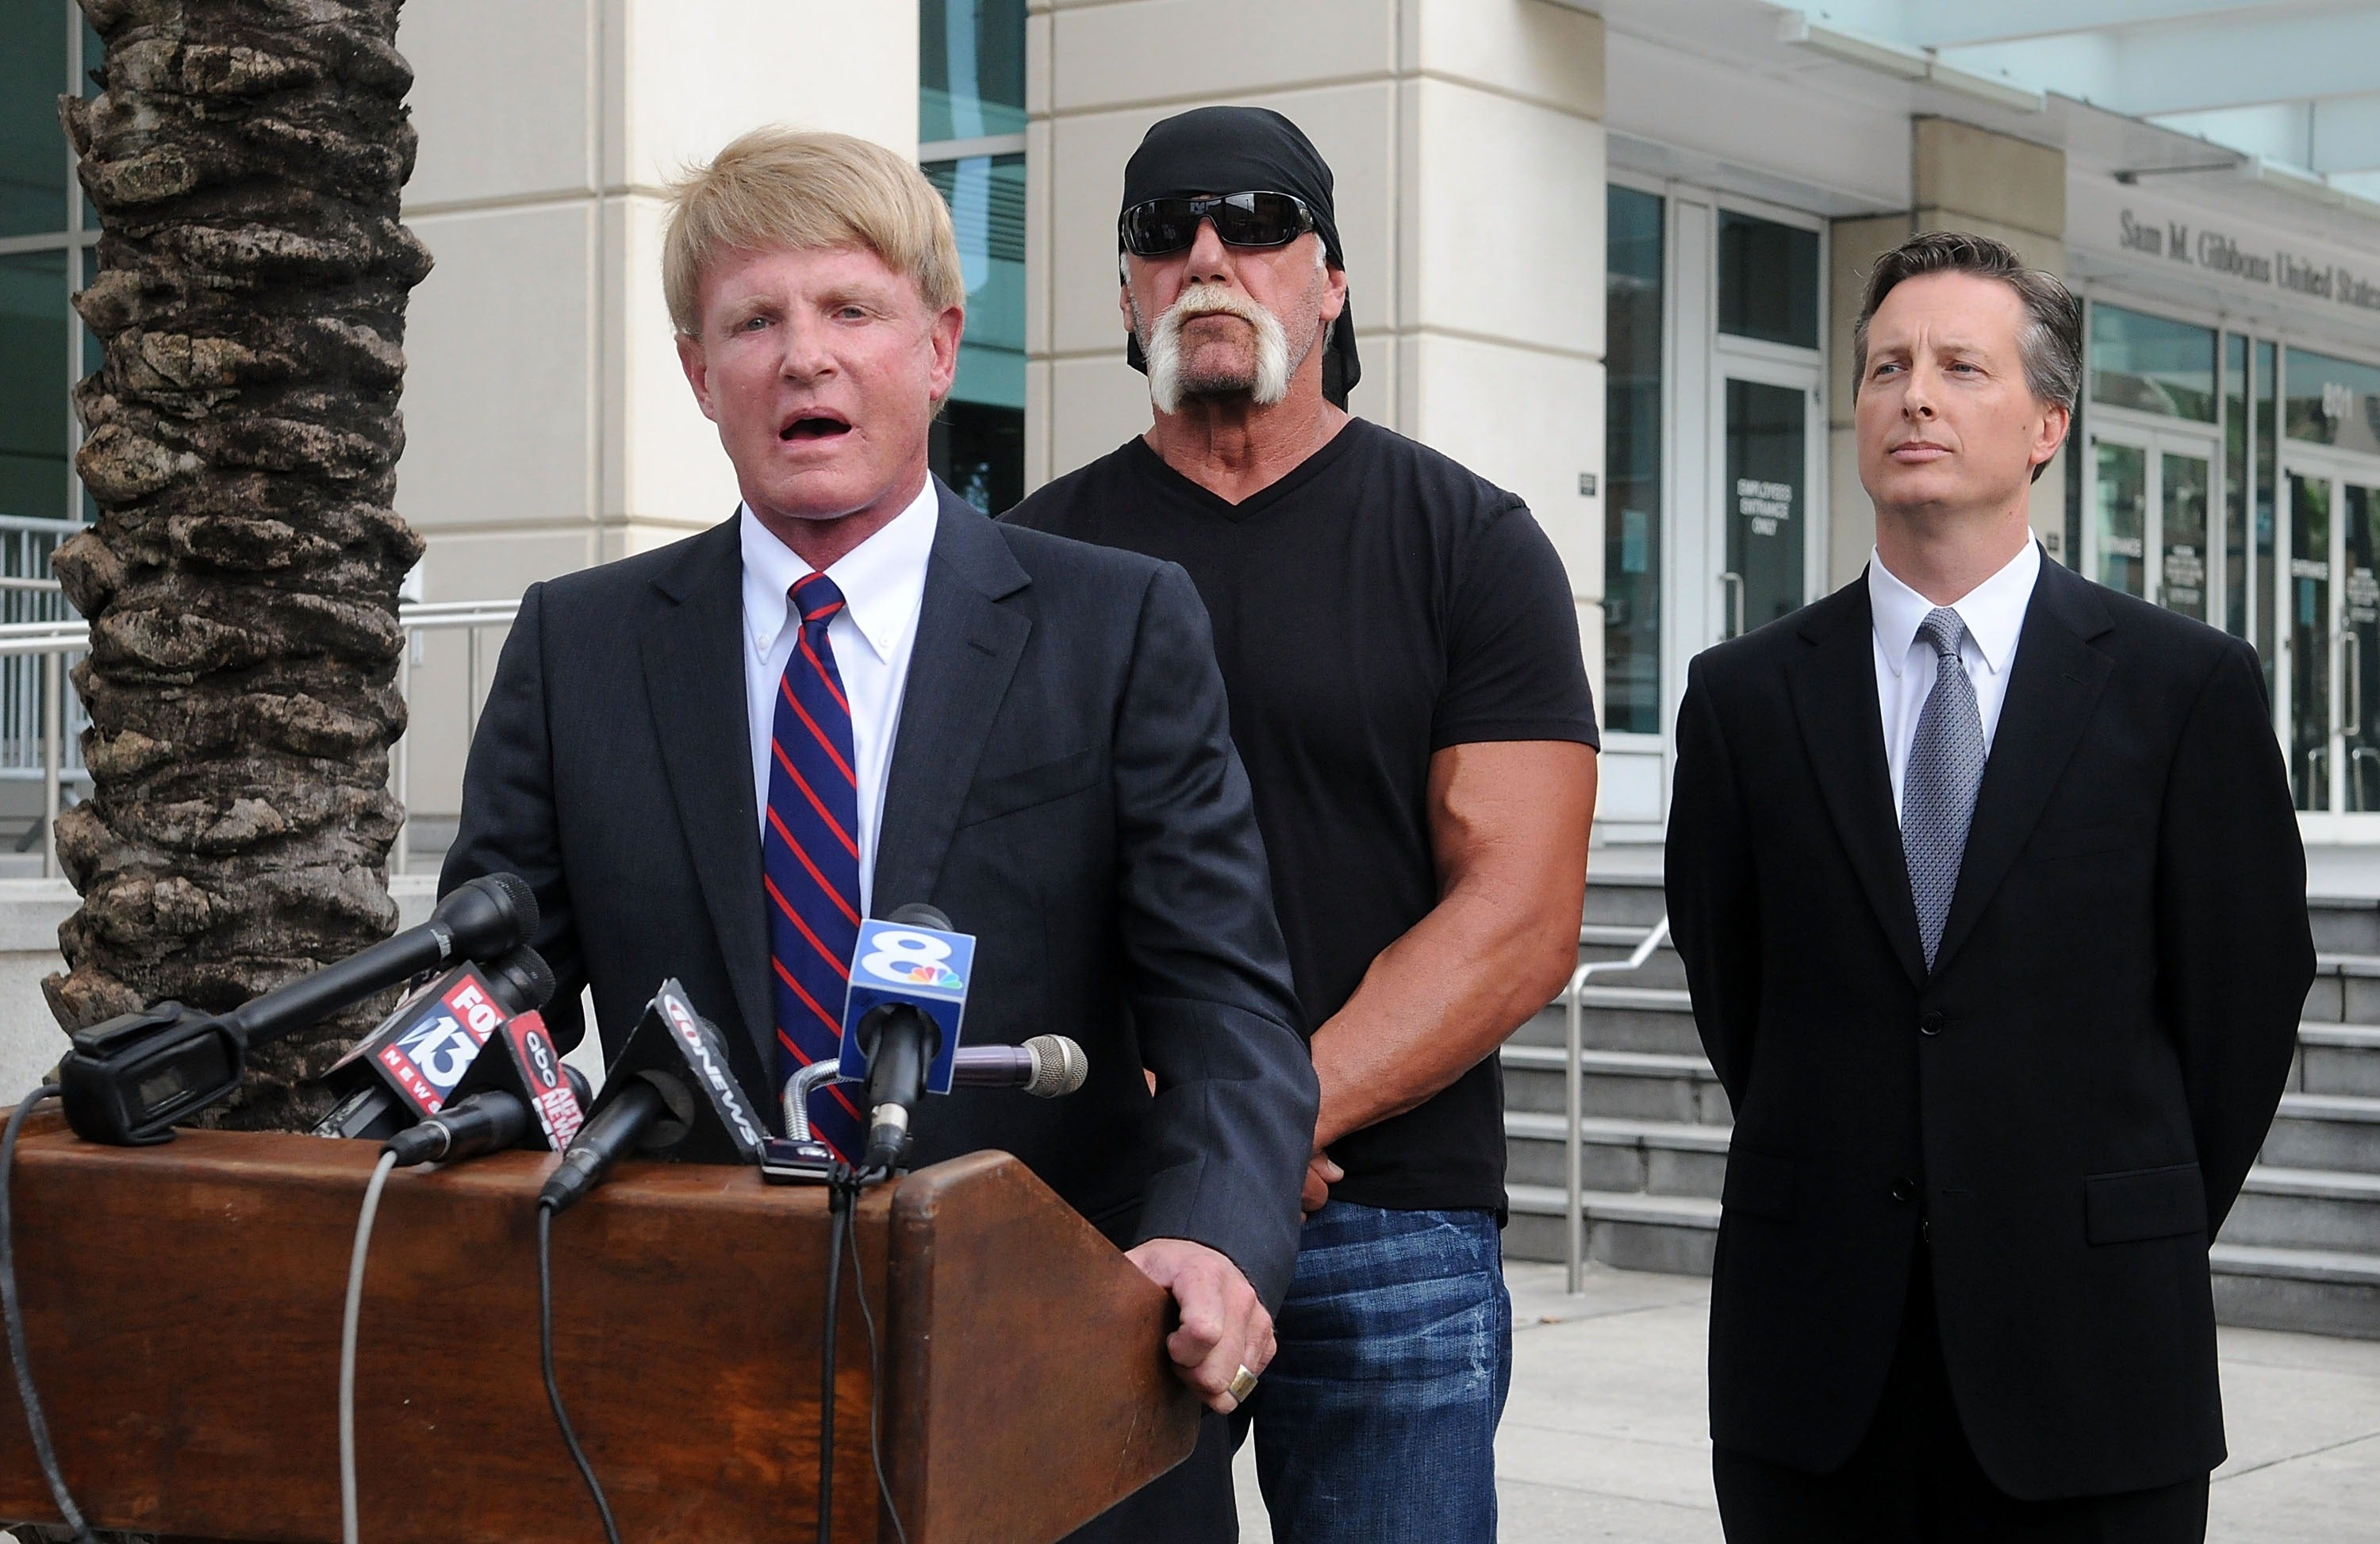 Gawker recently faced criticism and litigation after publishing a sex tape involving wrestling star Hulk Hogan (Getty)